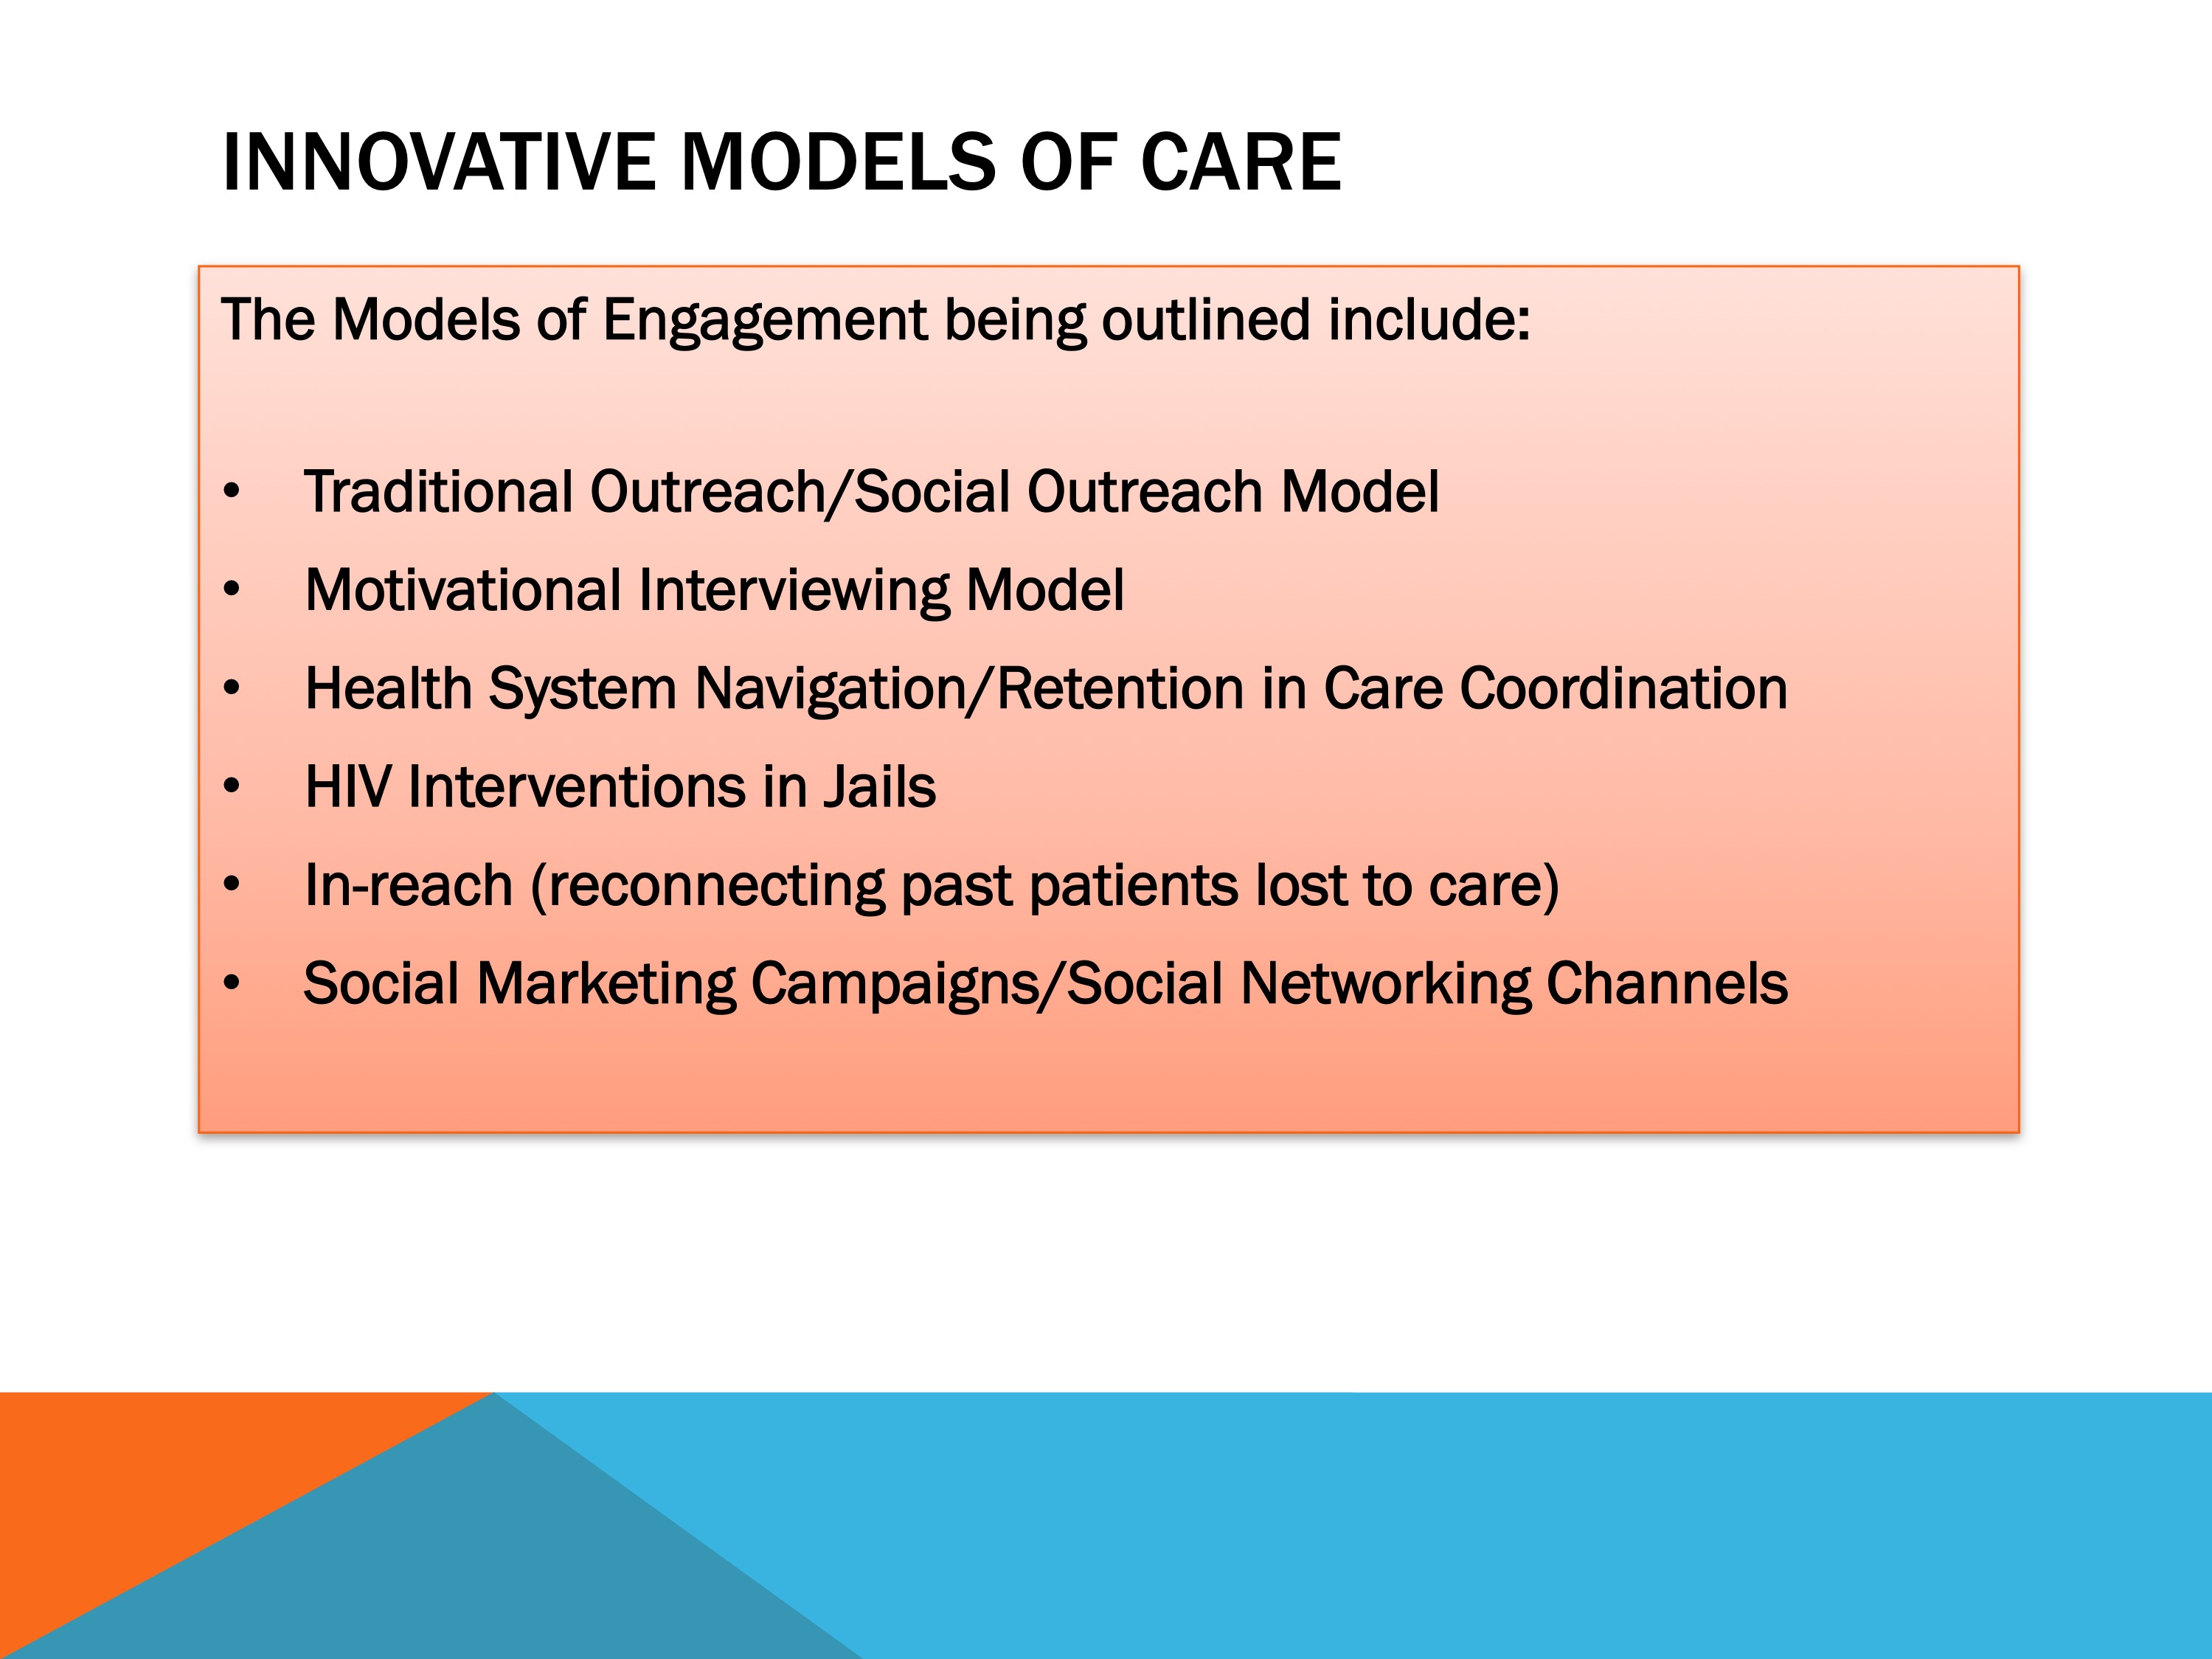 Innovative Models of Care